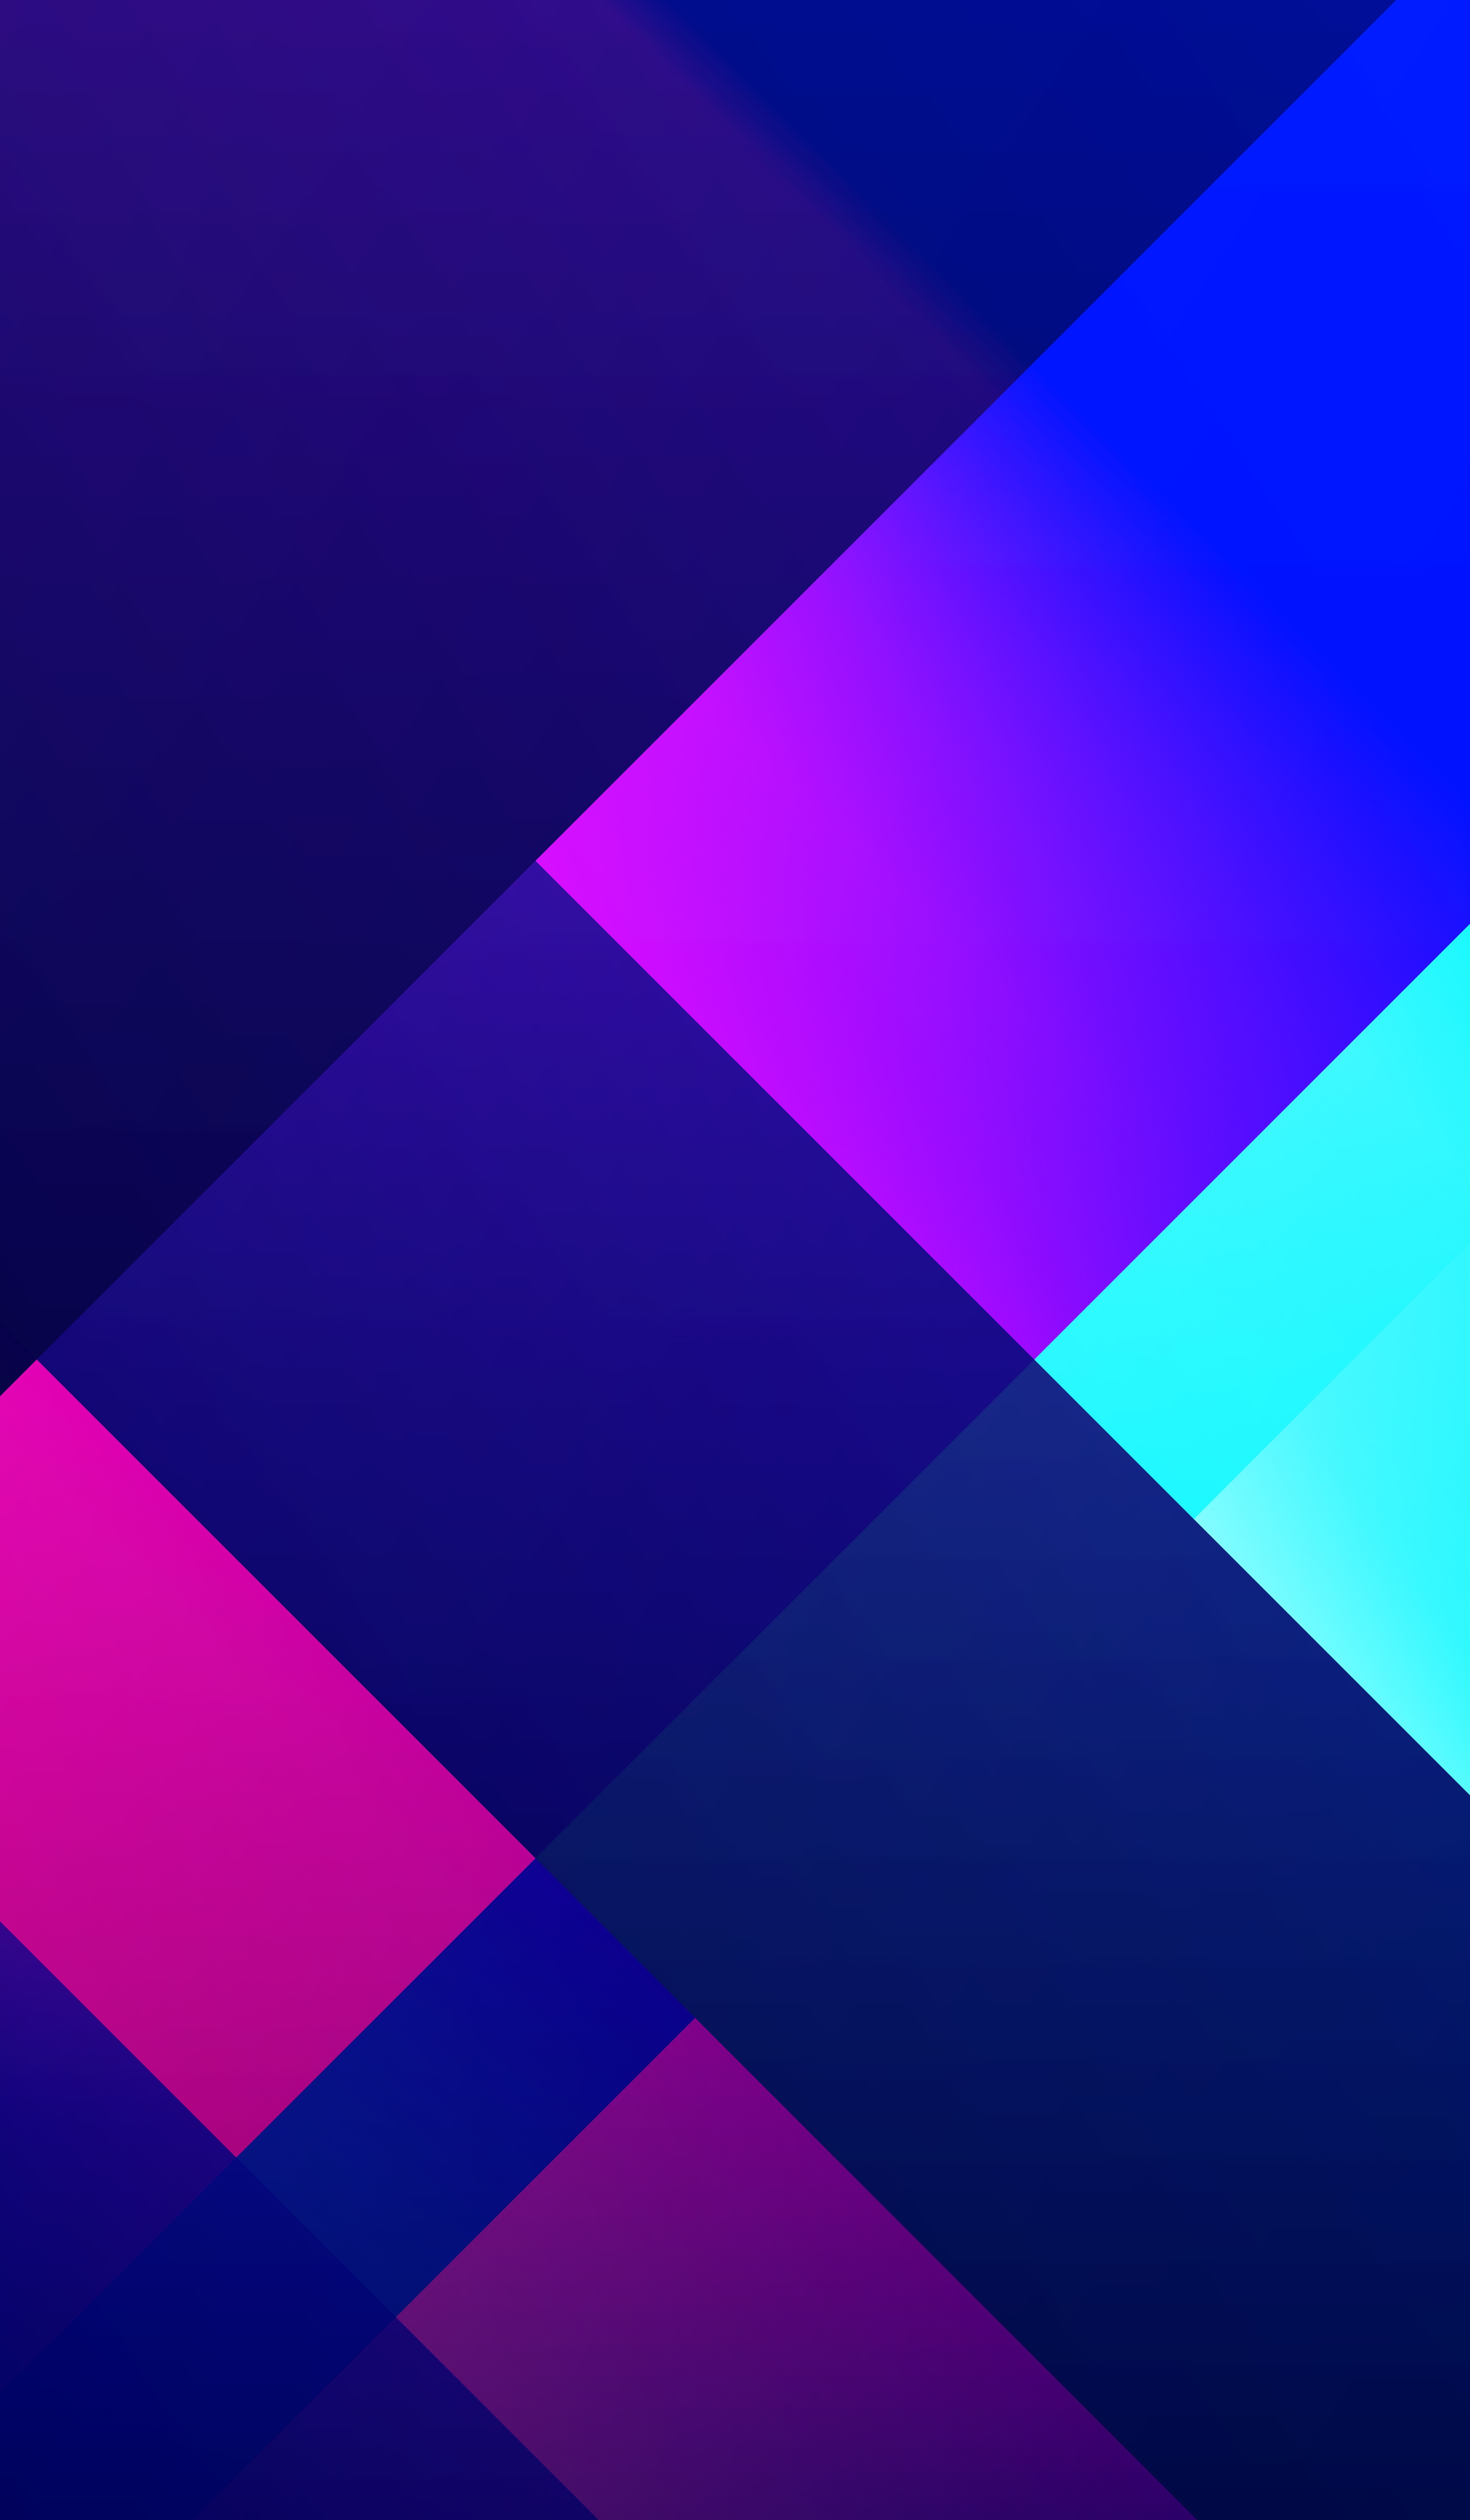 motley, gradient, geometry, abstract, multicolored